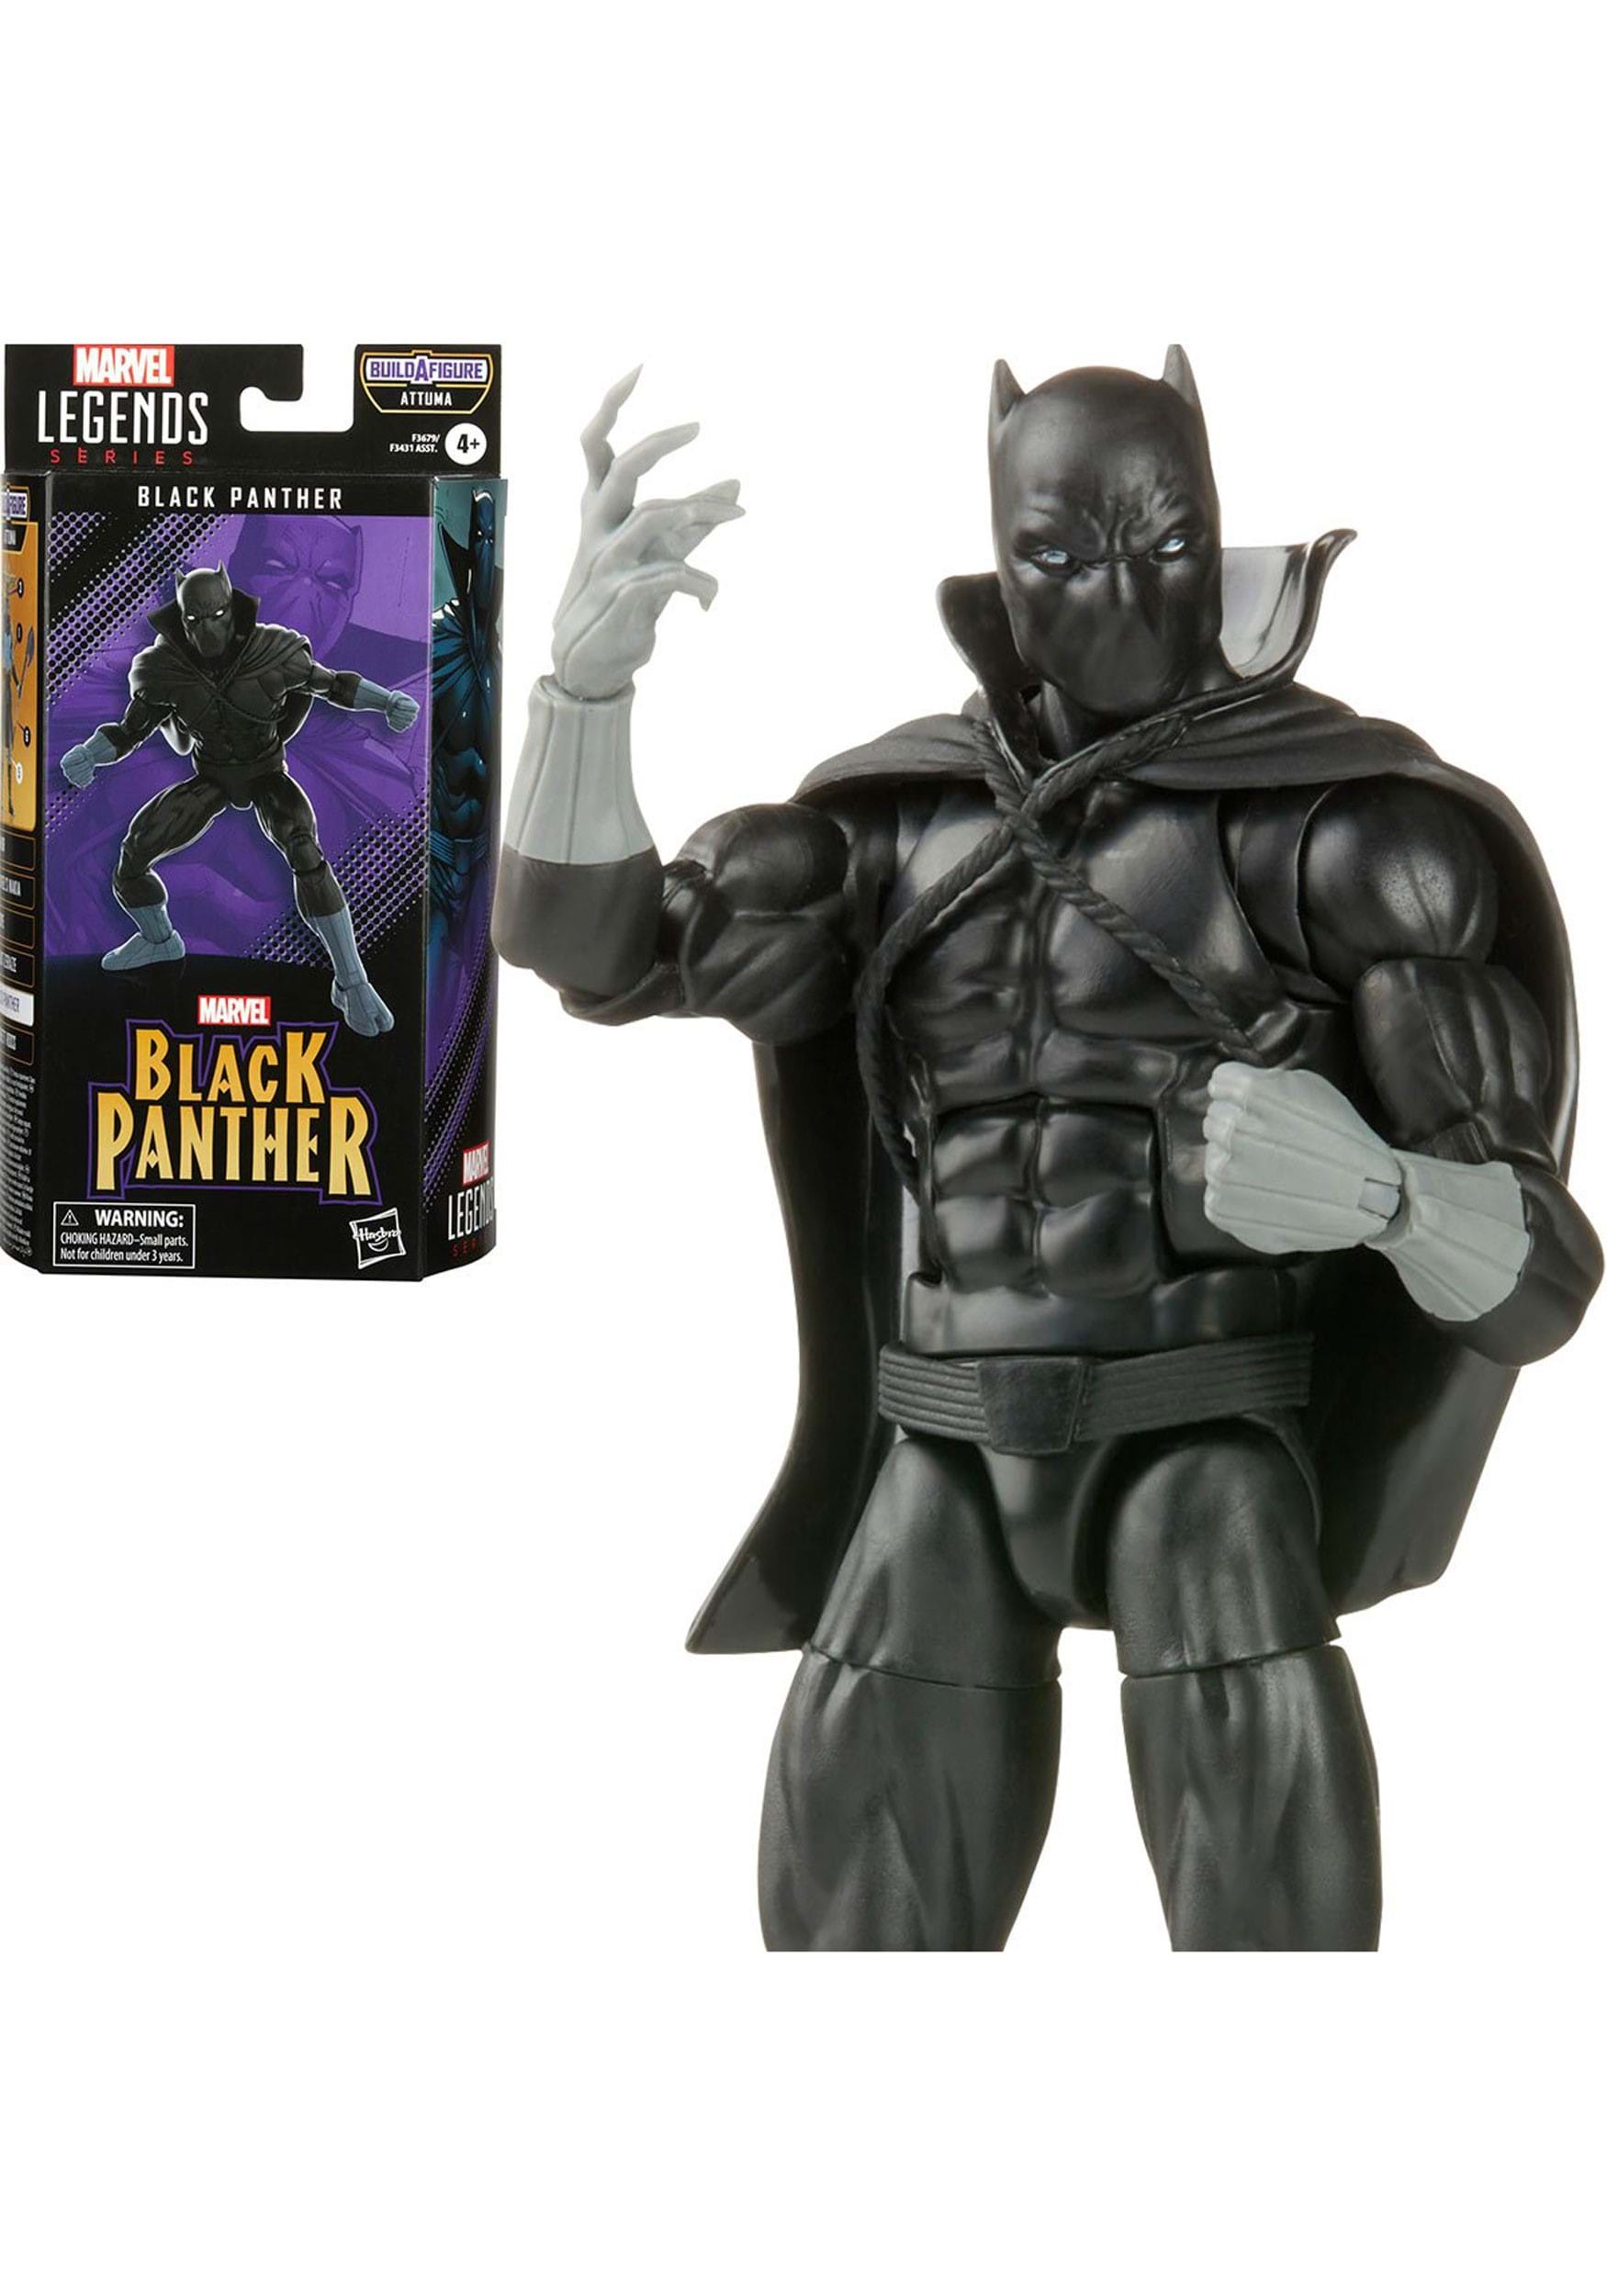 Black Panther toys and more to buy during Disney's friends and family sale